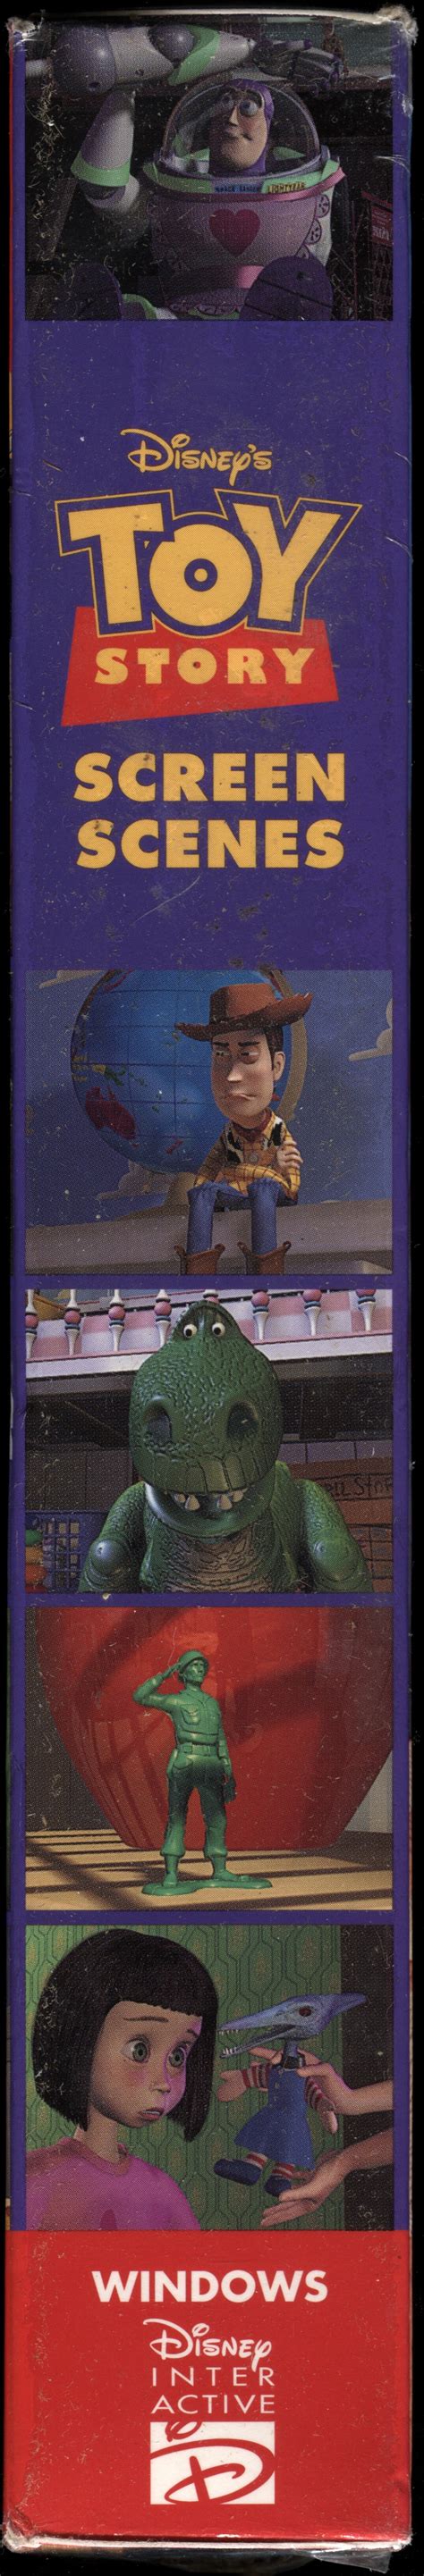 Toy Story Screen Scenes 1995 Disney Interactive Free Download